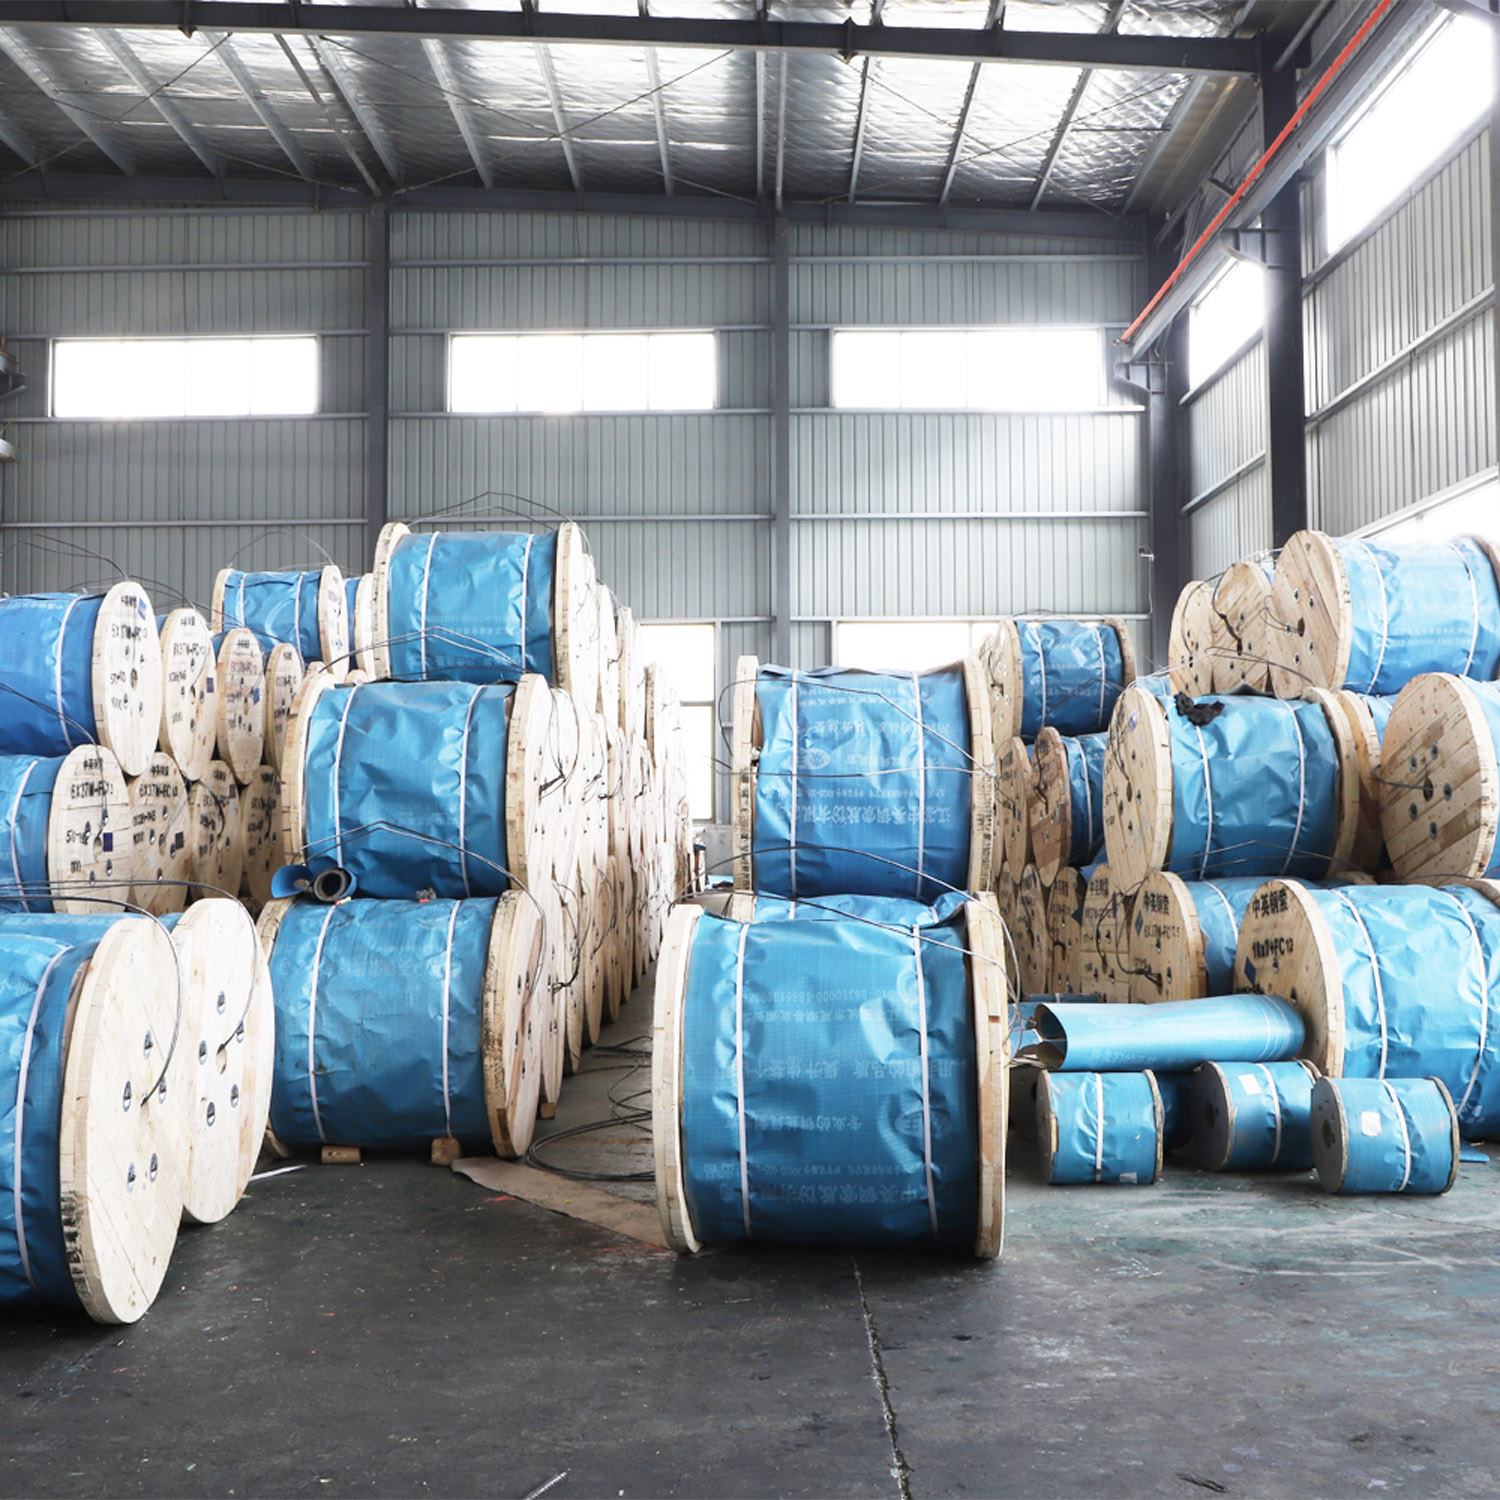 18*7 Class Galvanized Steel Wire Rope 1770N/mm2 No-rotating with many layers